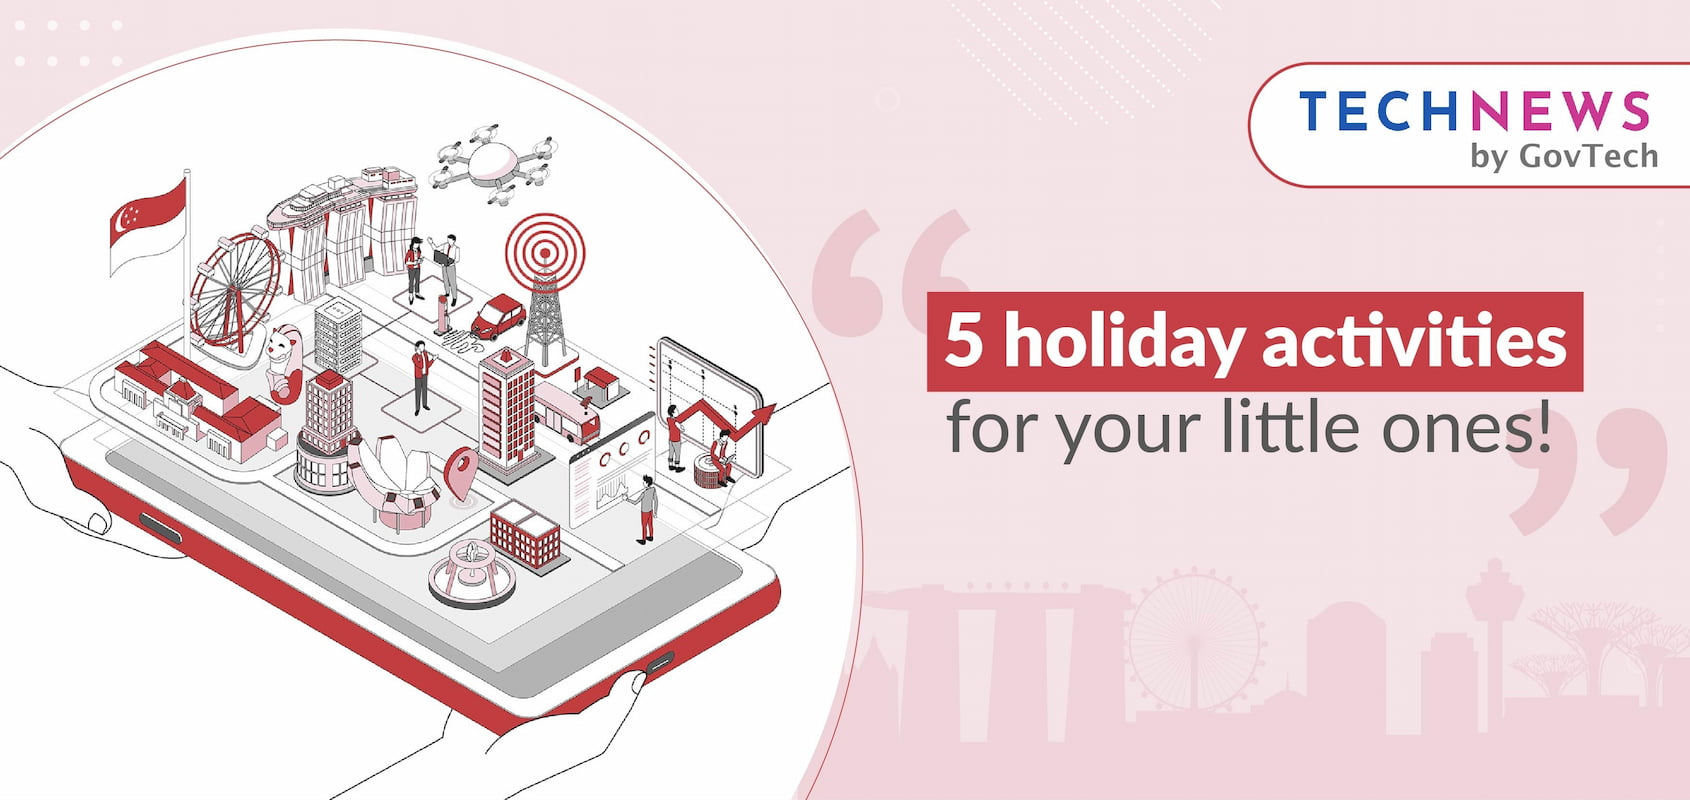 Holiday activities for kids at PlayScape, Smart Nation CityScape, and coding skills lessons.